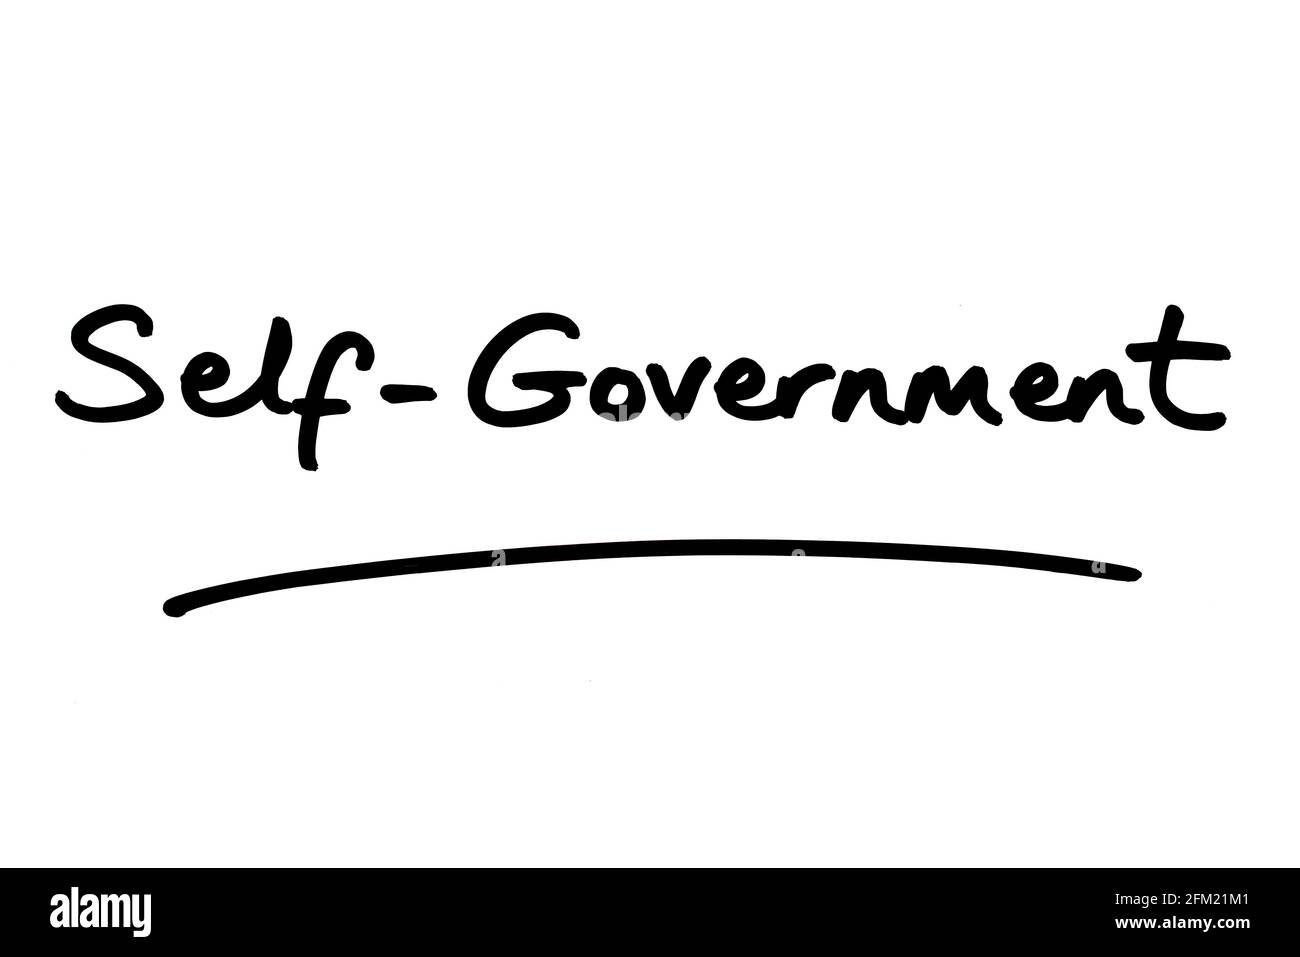 Self-Government, handwritten on a white background. Stock Photo